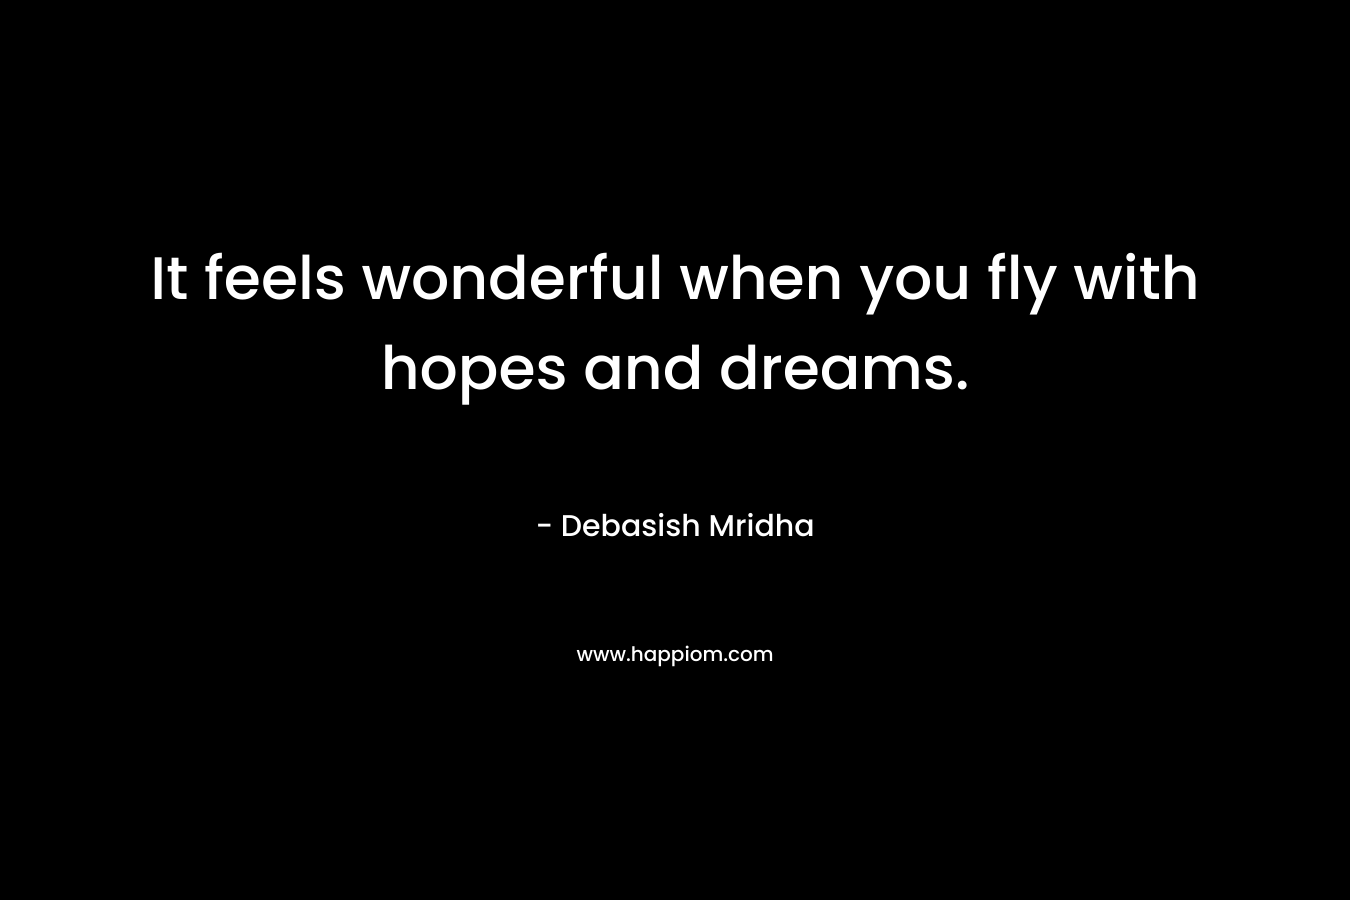 It feels wonderful when you fly with hopes and dreams.